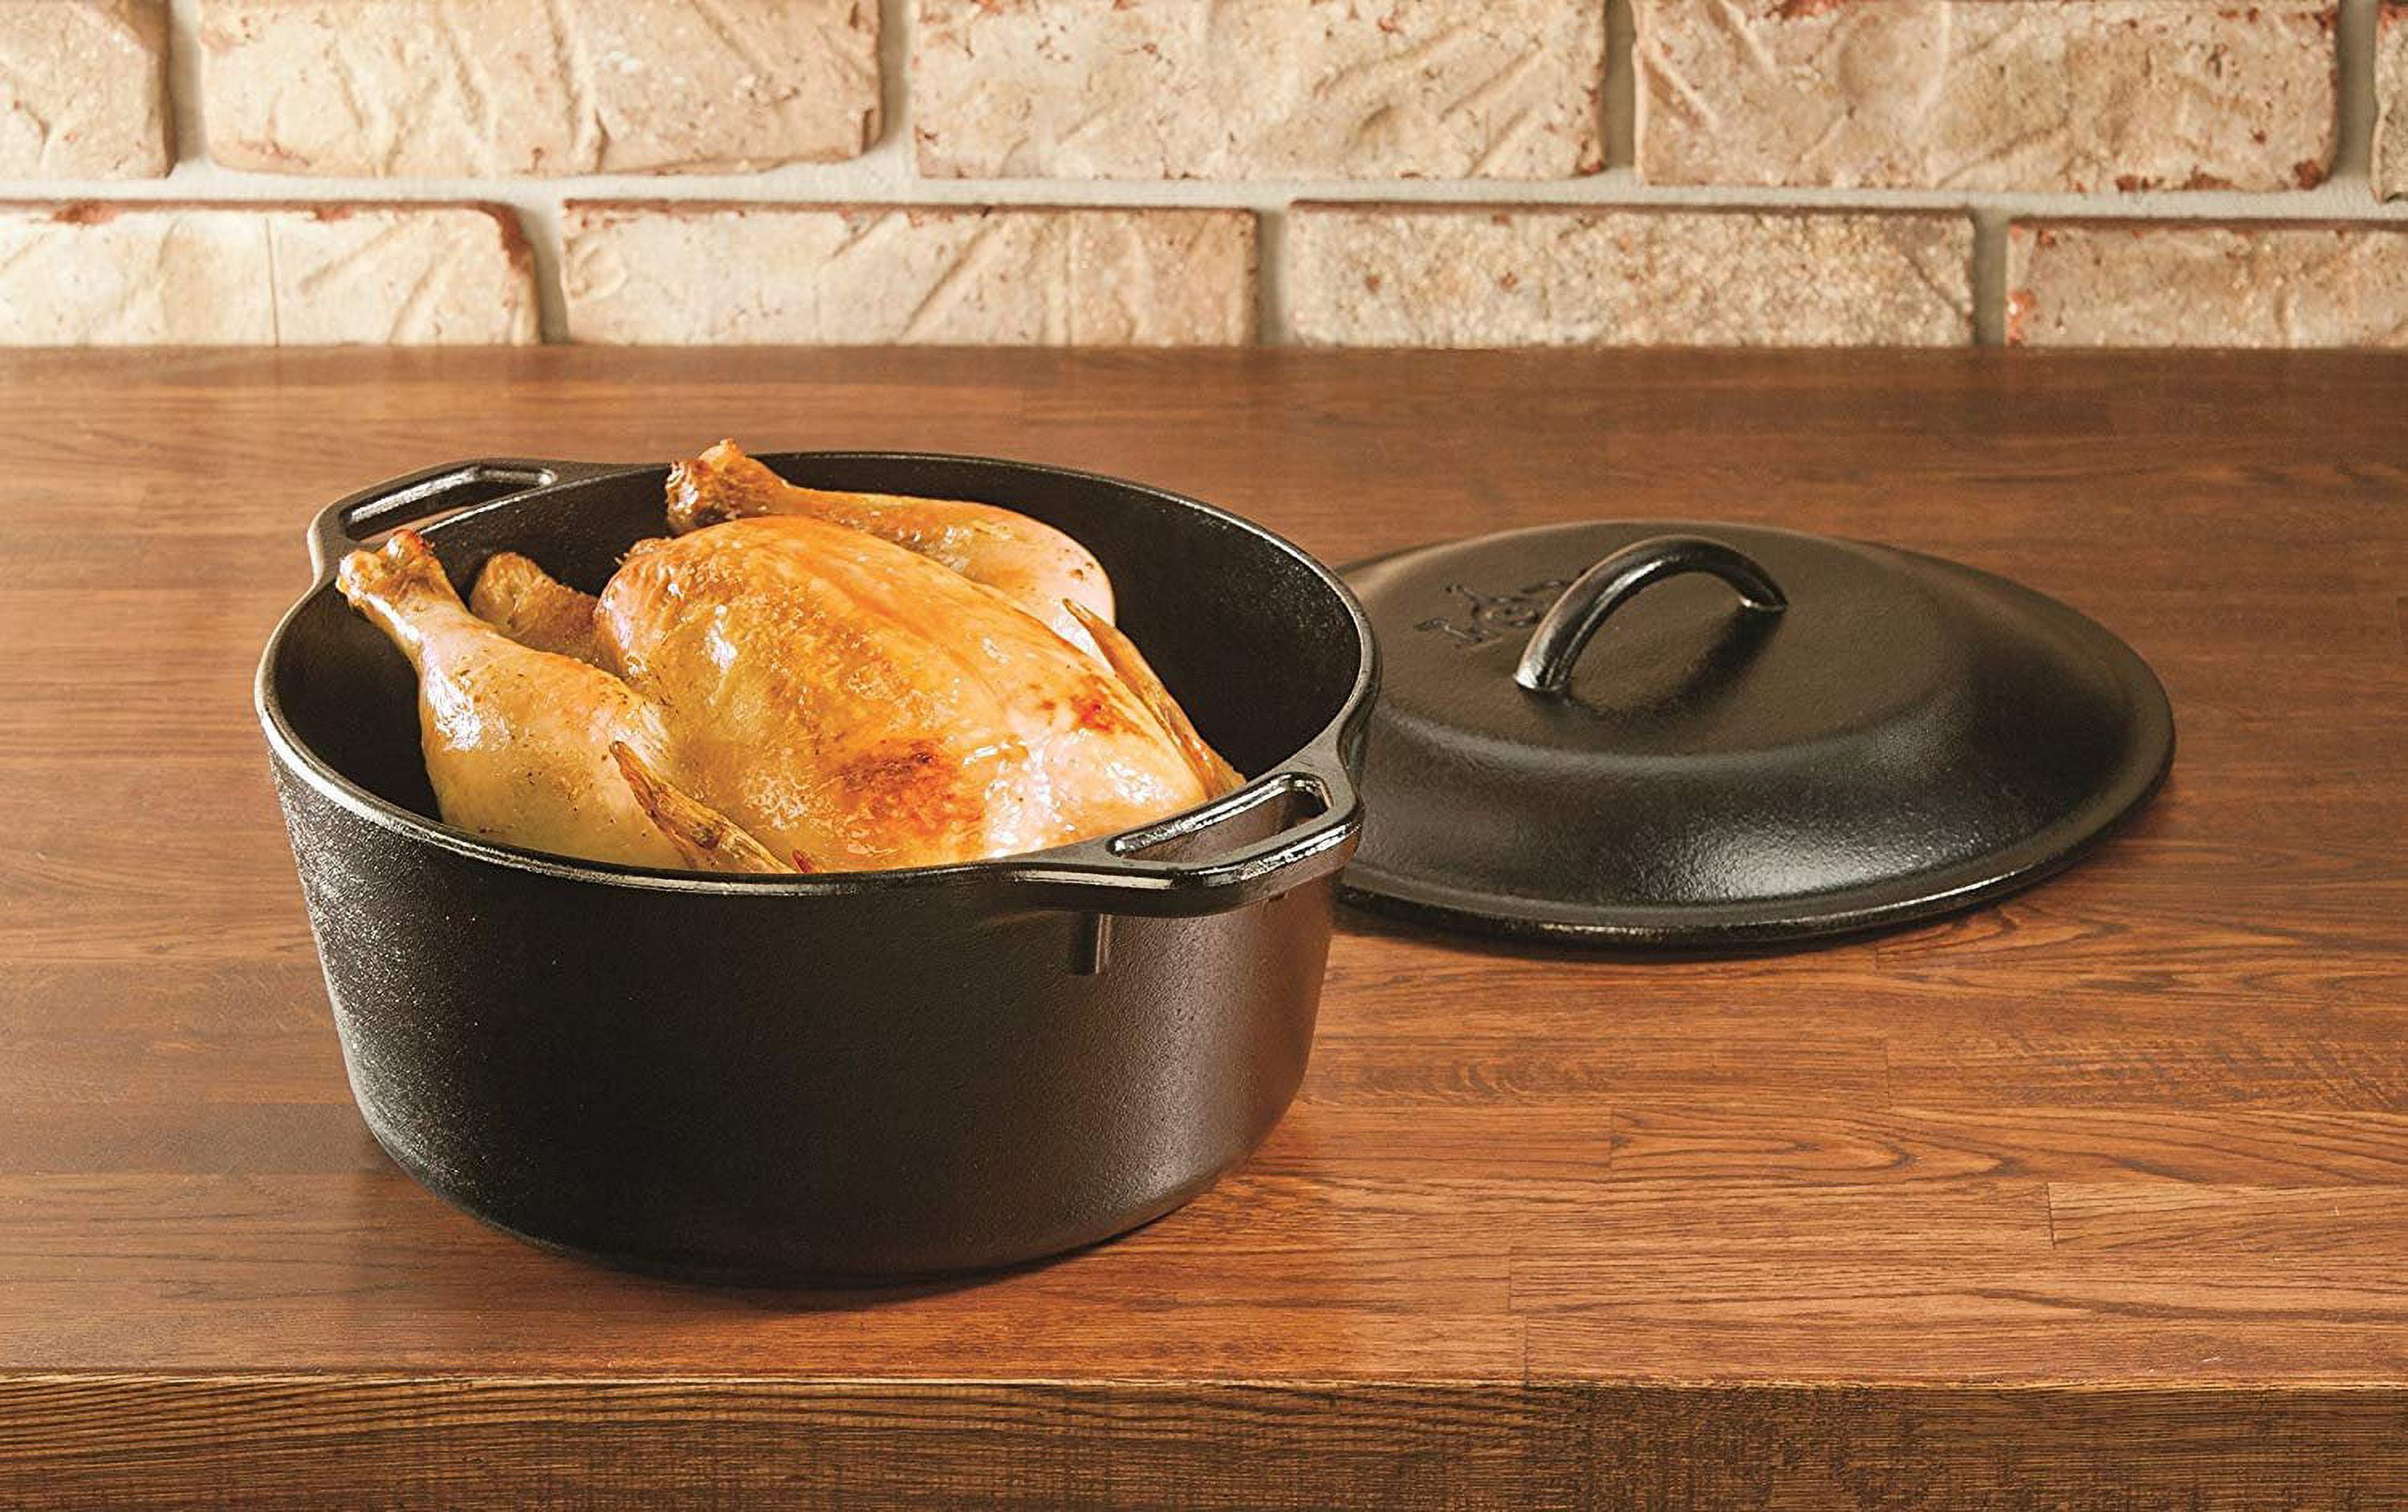 Lodge 2-Quart Cast Iron Dutch Oven Only $18.59 Shipped (Regularly $31)